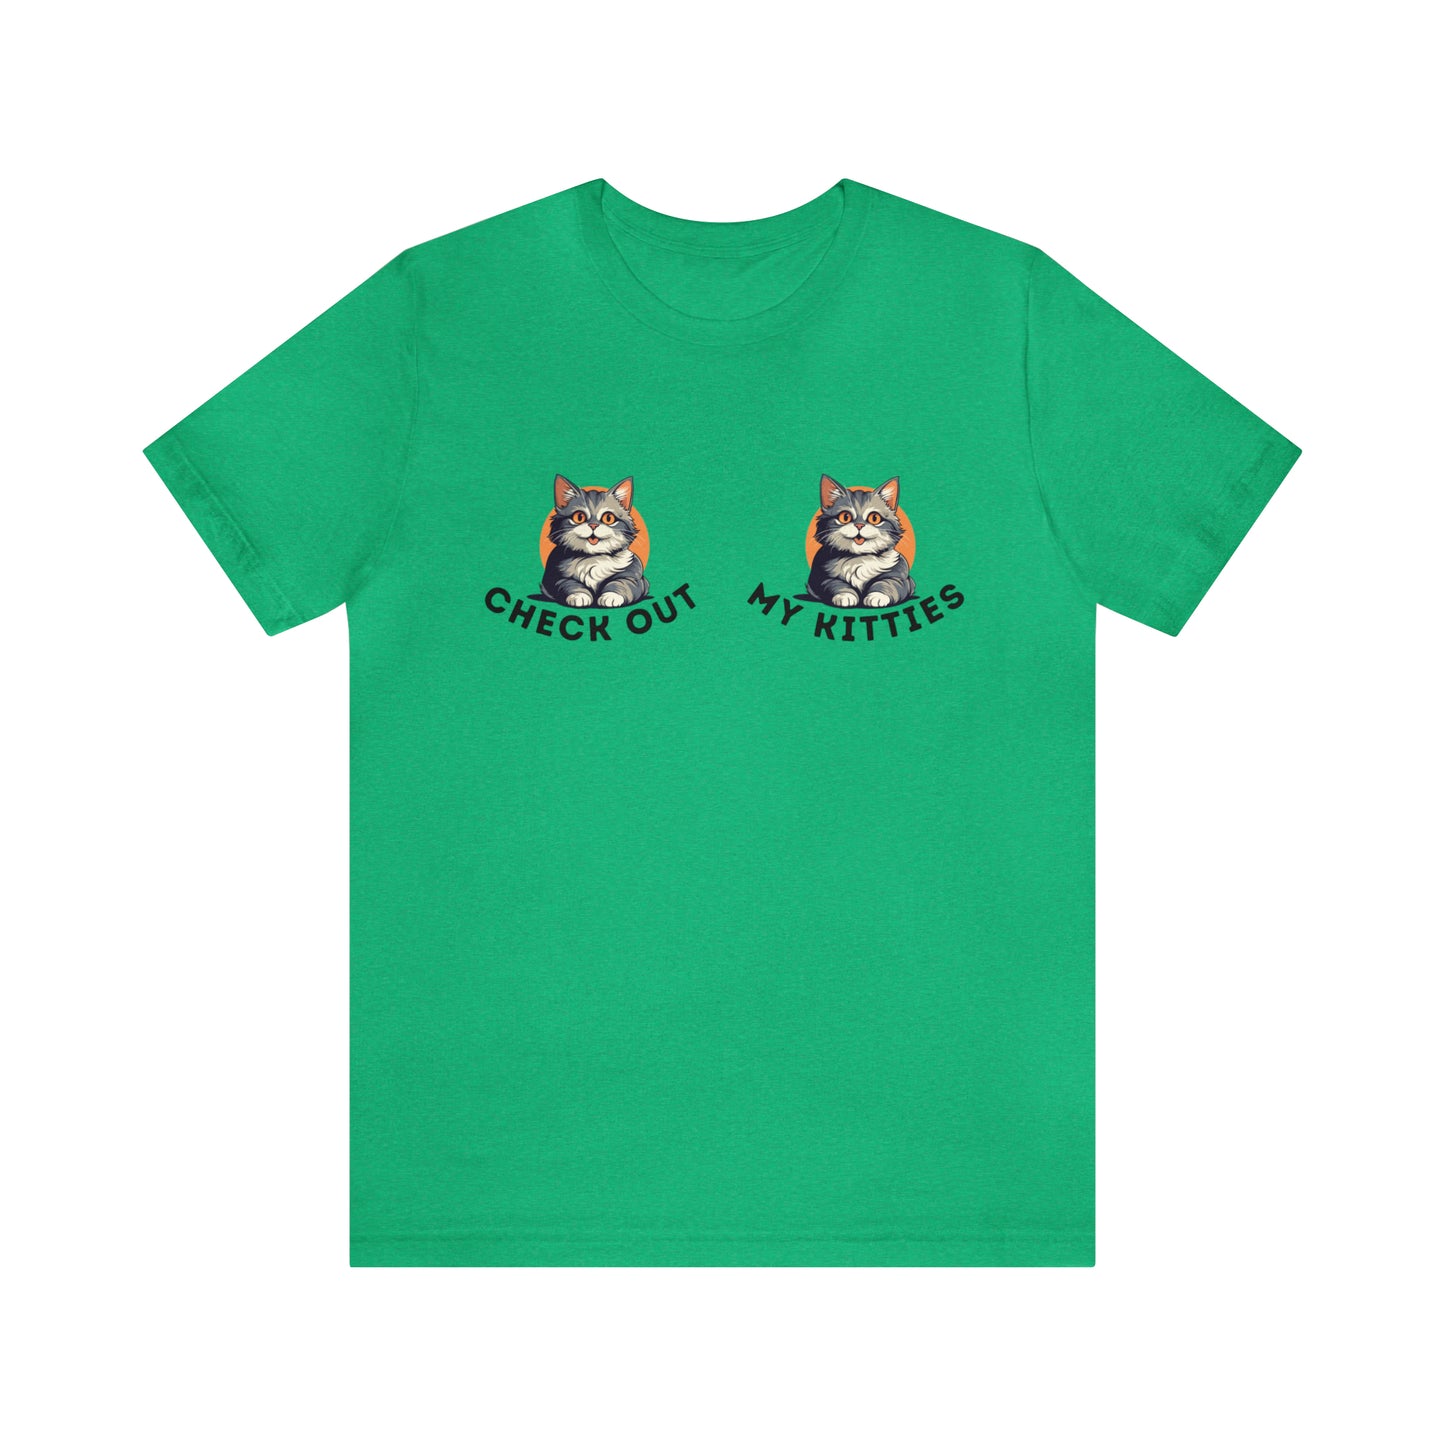 Kitty Cat T-Shirt / Check Out My Kitties Shirt / Unisex Jersey Short Sleeve Tee / Humorous Pet Clothes